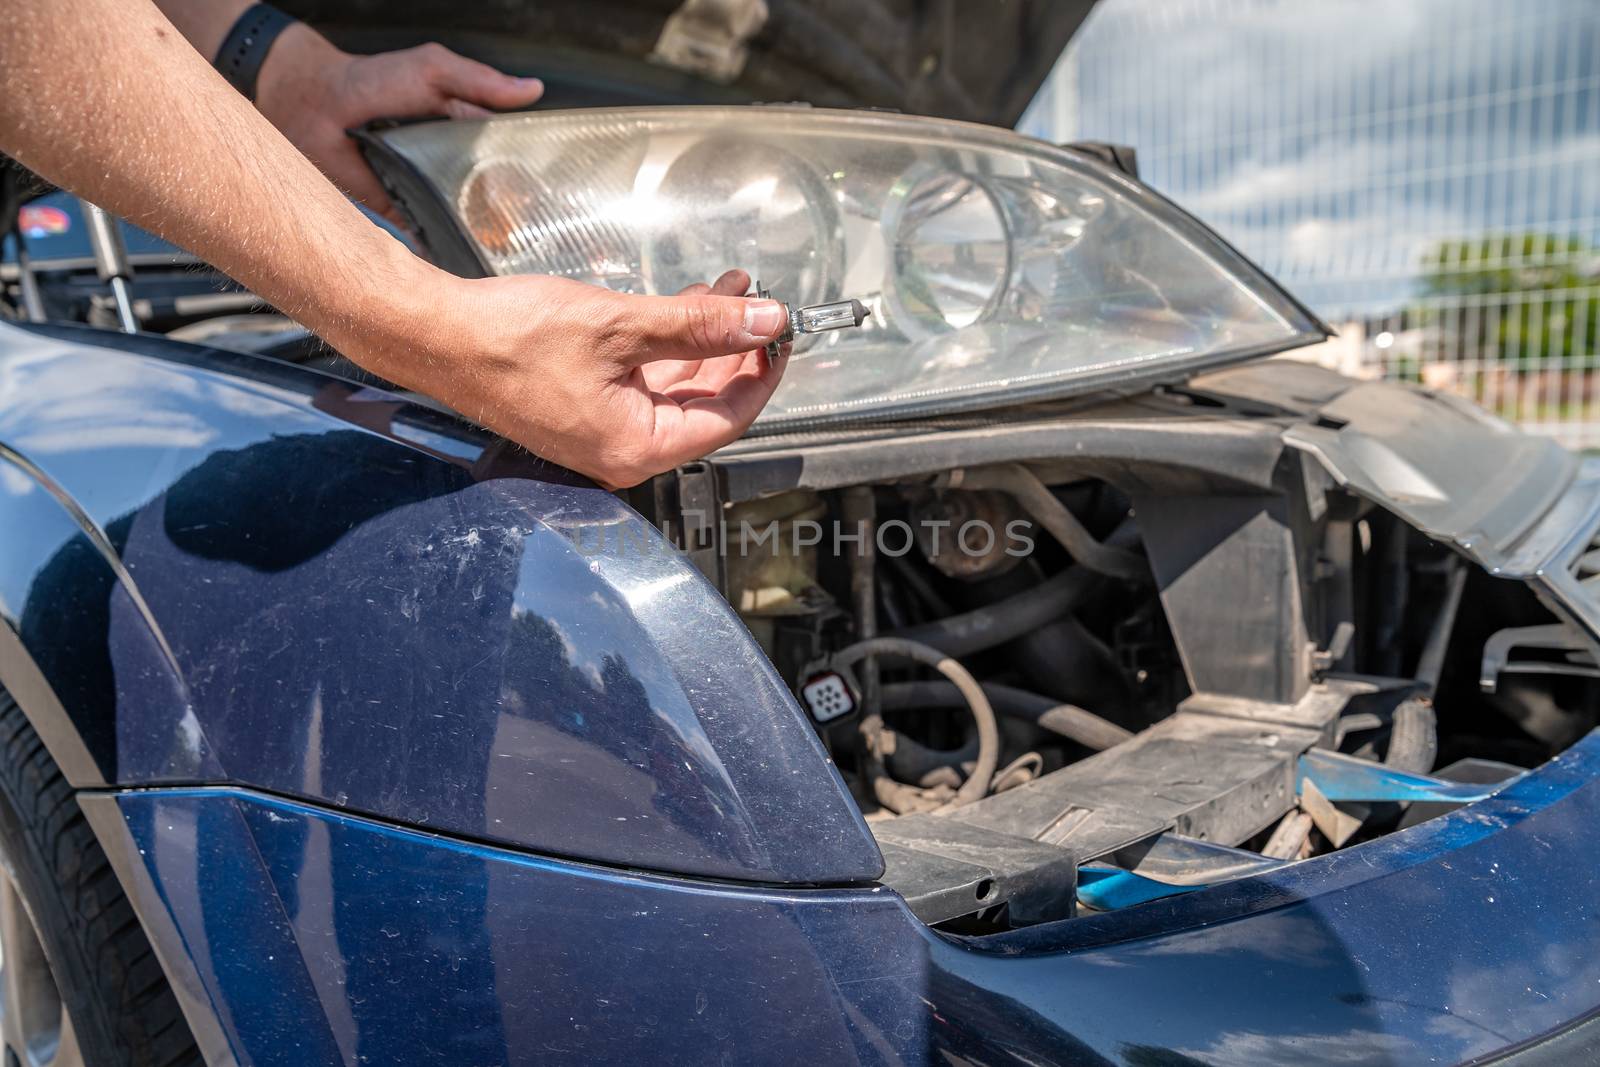 bulb replacement in the car headlight